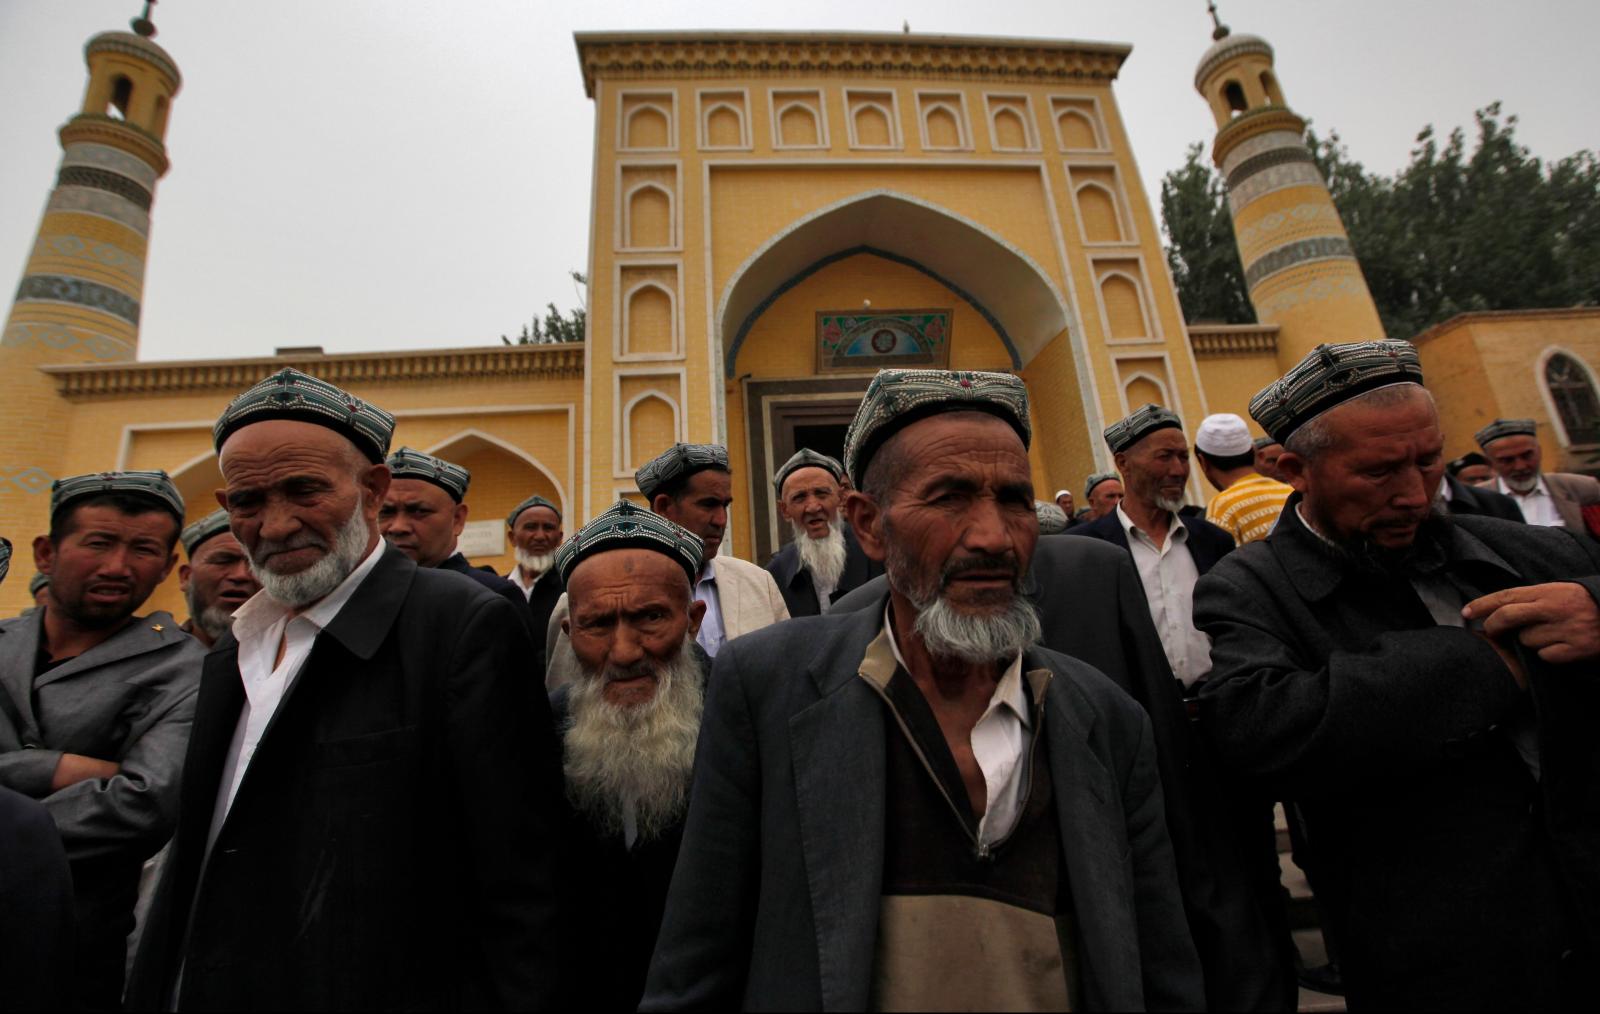 China flat out denies the mass incarceration of Xinjiang’s Uyghurs as testimonies trickle out